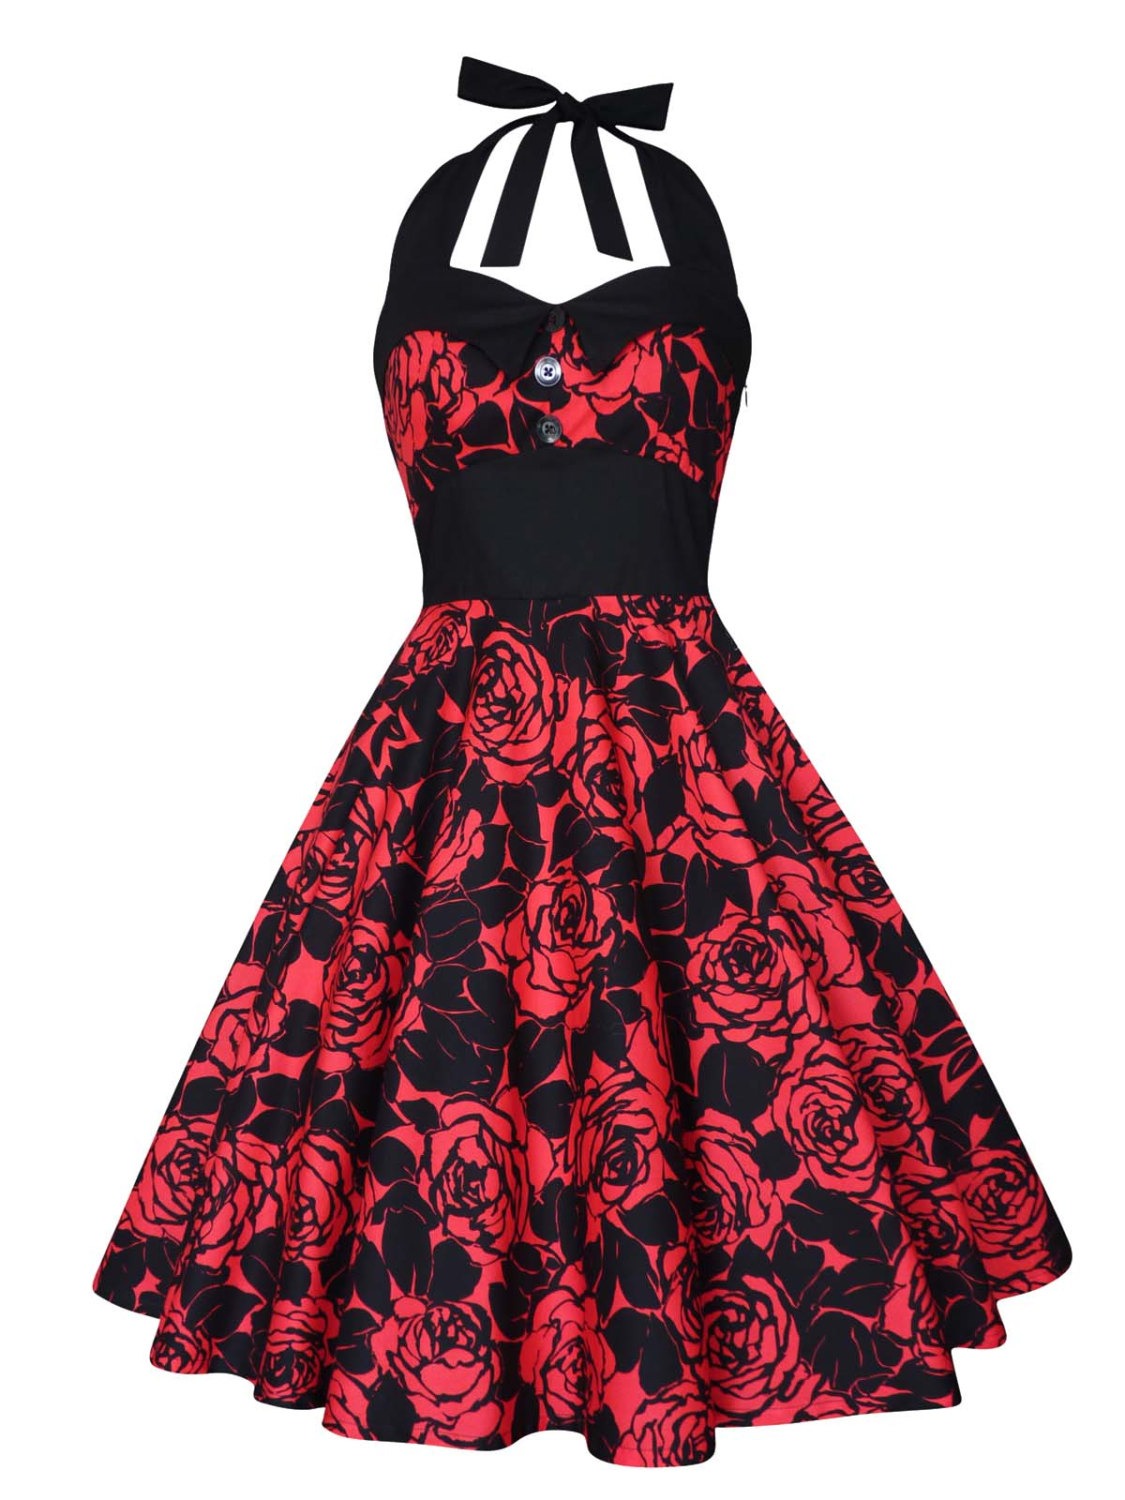 Lady Mayra Ashley Red Roses Dress Vintage Rockabilly Pin Up 1950s Retro Style Gothic Lolita Steampunk Swing Prom Party Plus Size Clothing steampunk buy now online